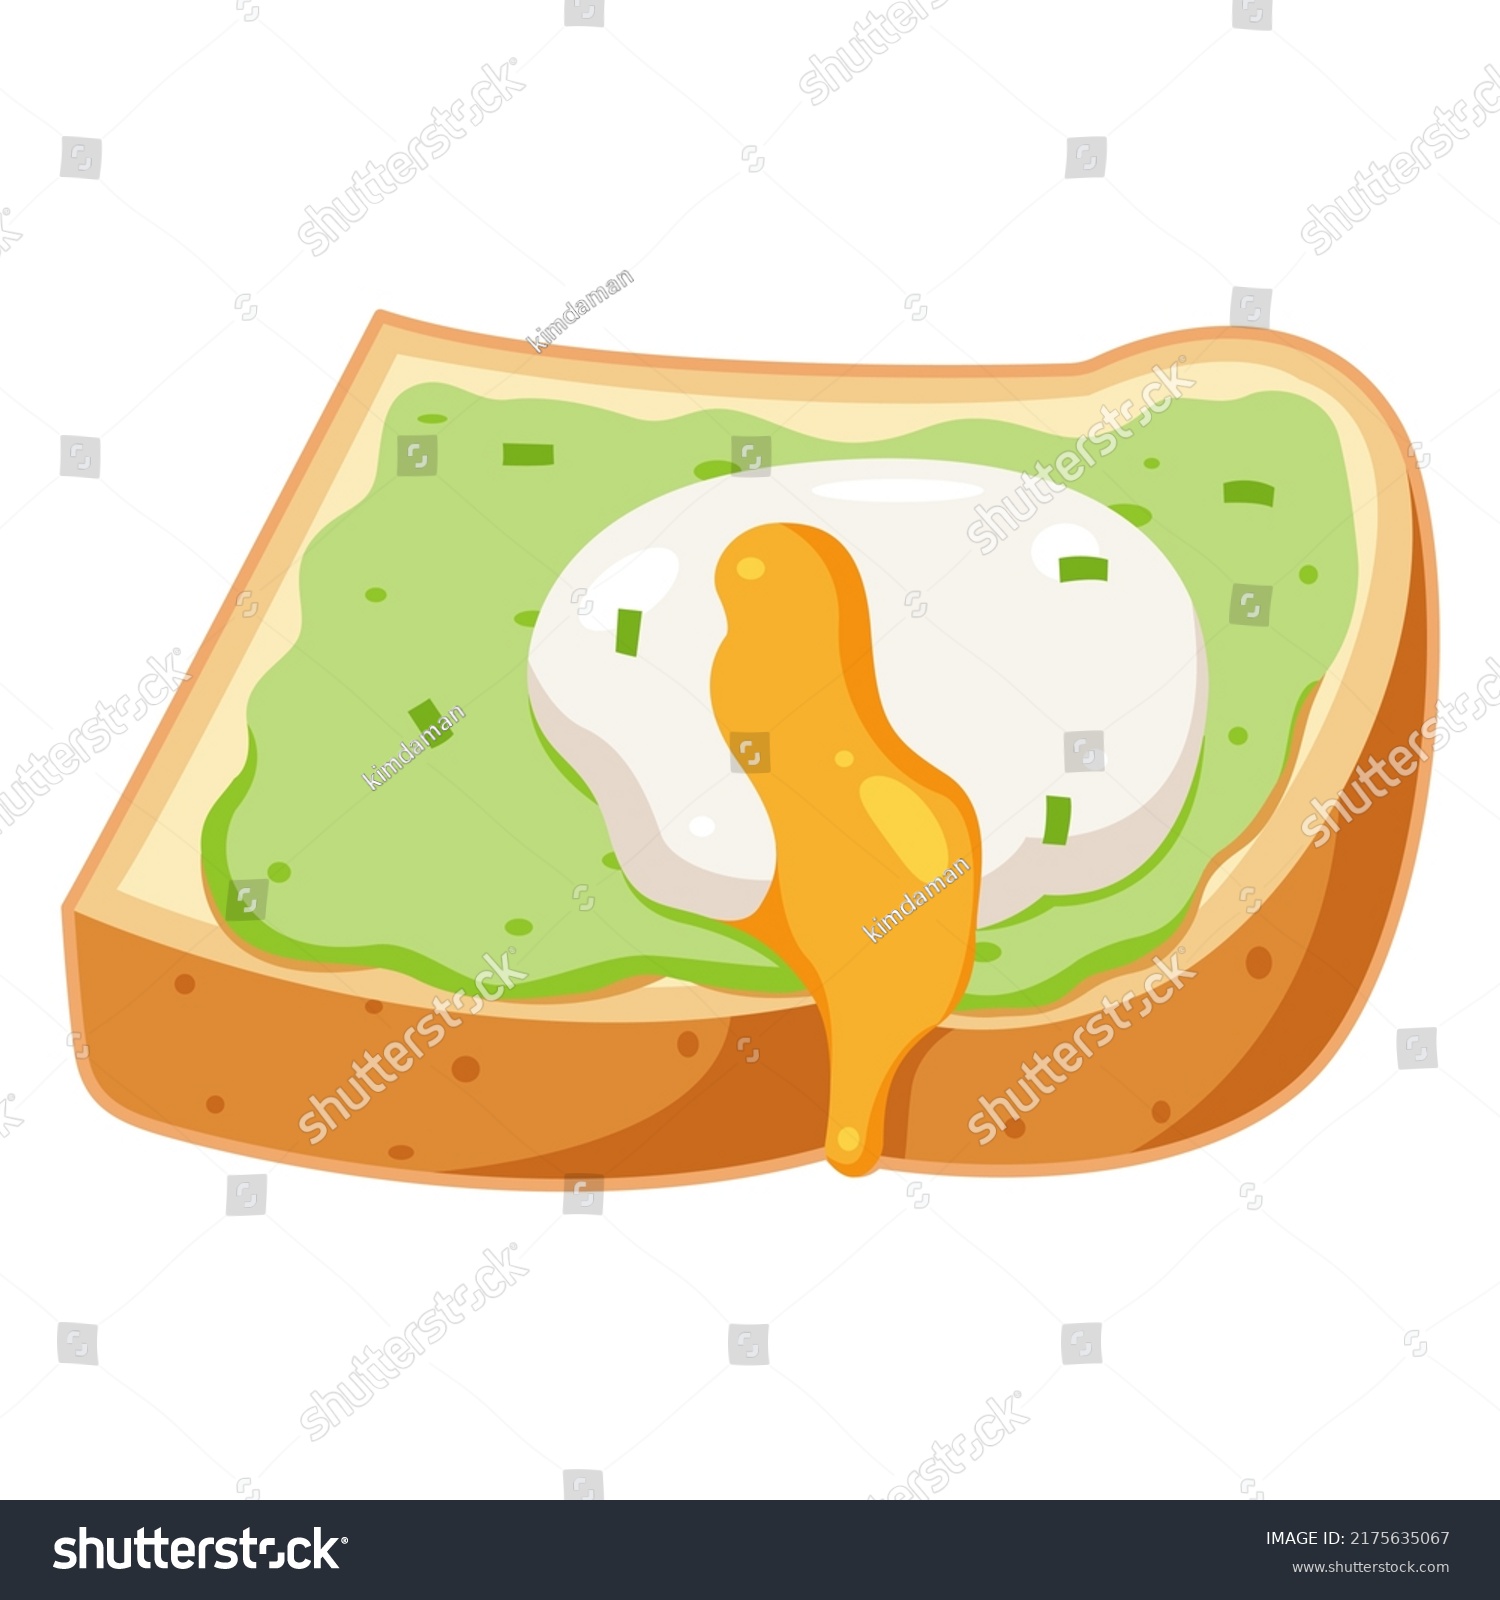 SVG of Delicious breakfast. Avocado toast banquet appetizers Healthy wholesome breakfast with  toast and egg svg